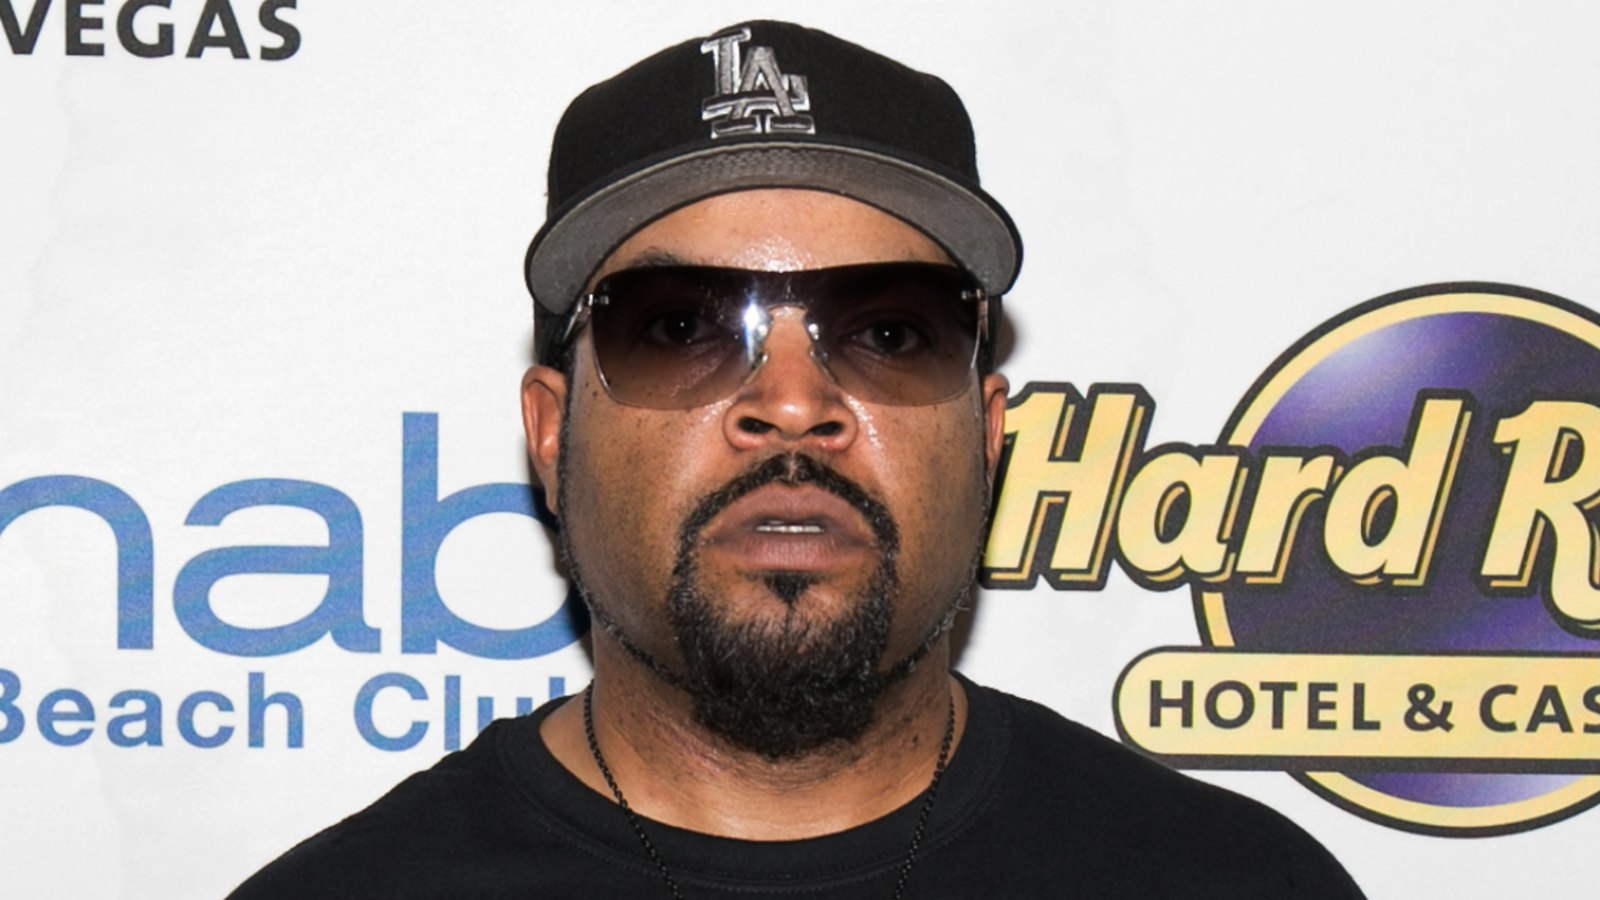 https://www.usmagazine.com/wp-content/uploads/2022/11/Ice-Cube-Says-He-Lost-a-9-Million-Role-Because-He-Refused-to-Get-COVID-Vaccine.jpg?crop=0px%2C102px%2C1513px%2C855px&resize=1600%2C900&quality=86&strip=all